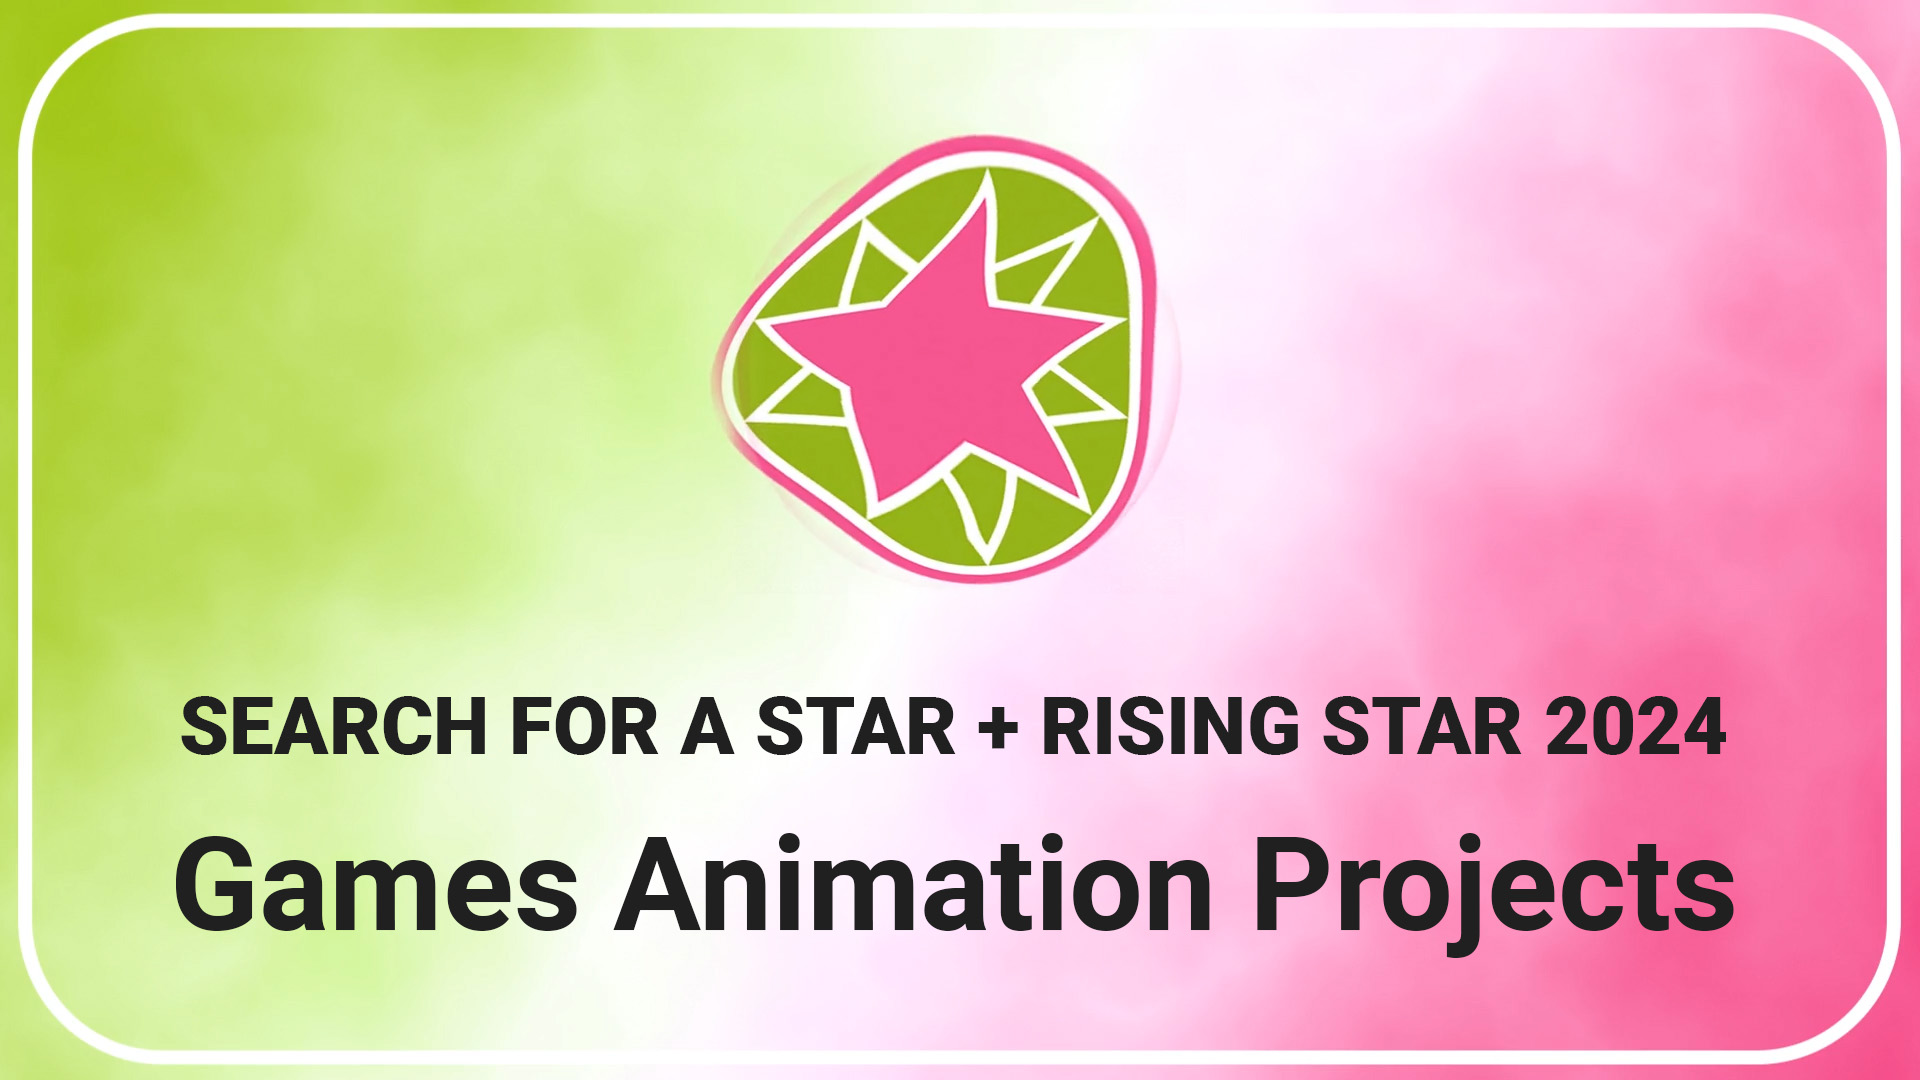 Games Animation Projects | Search For A Star 2024